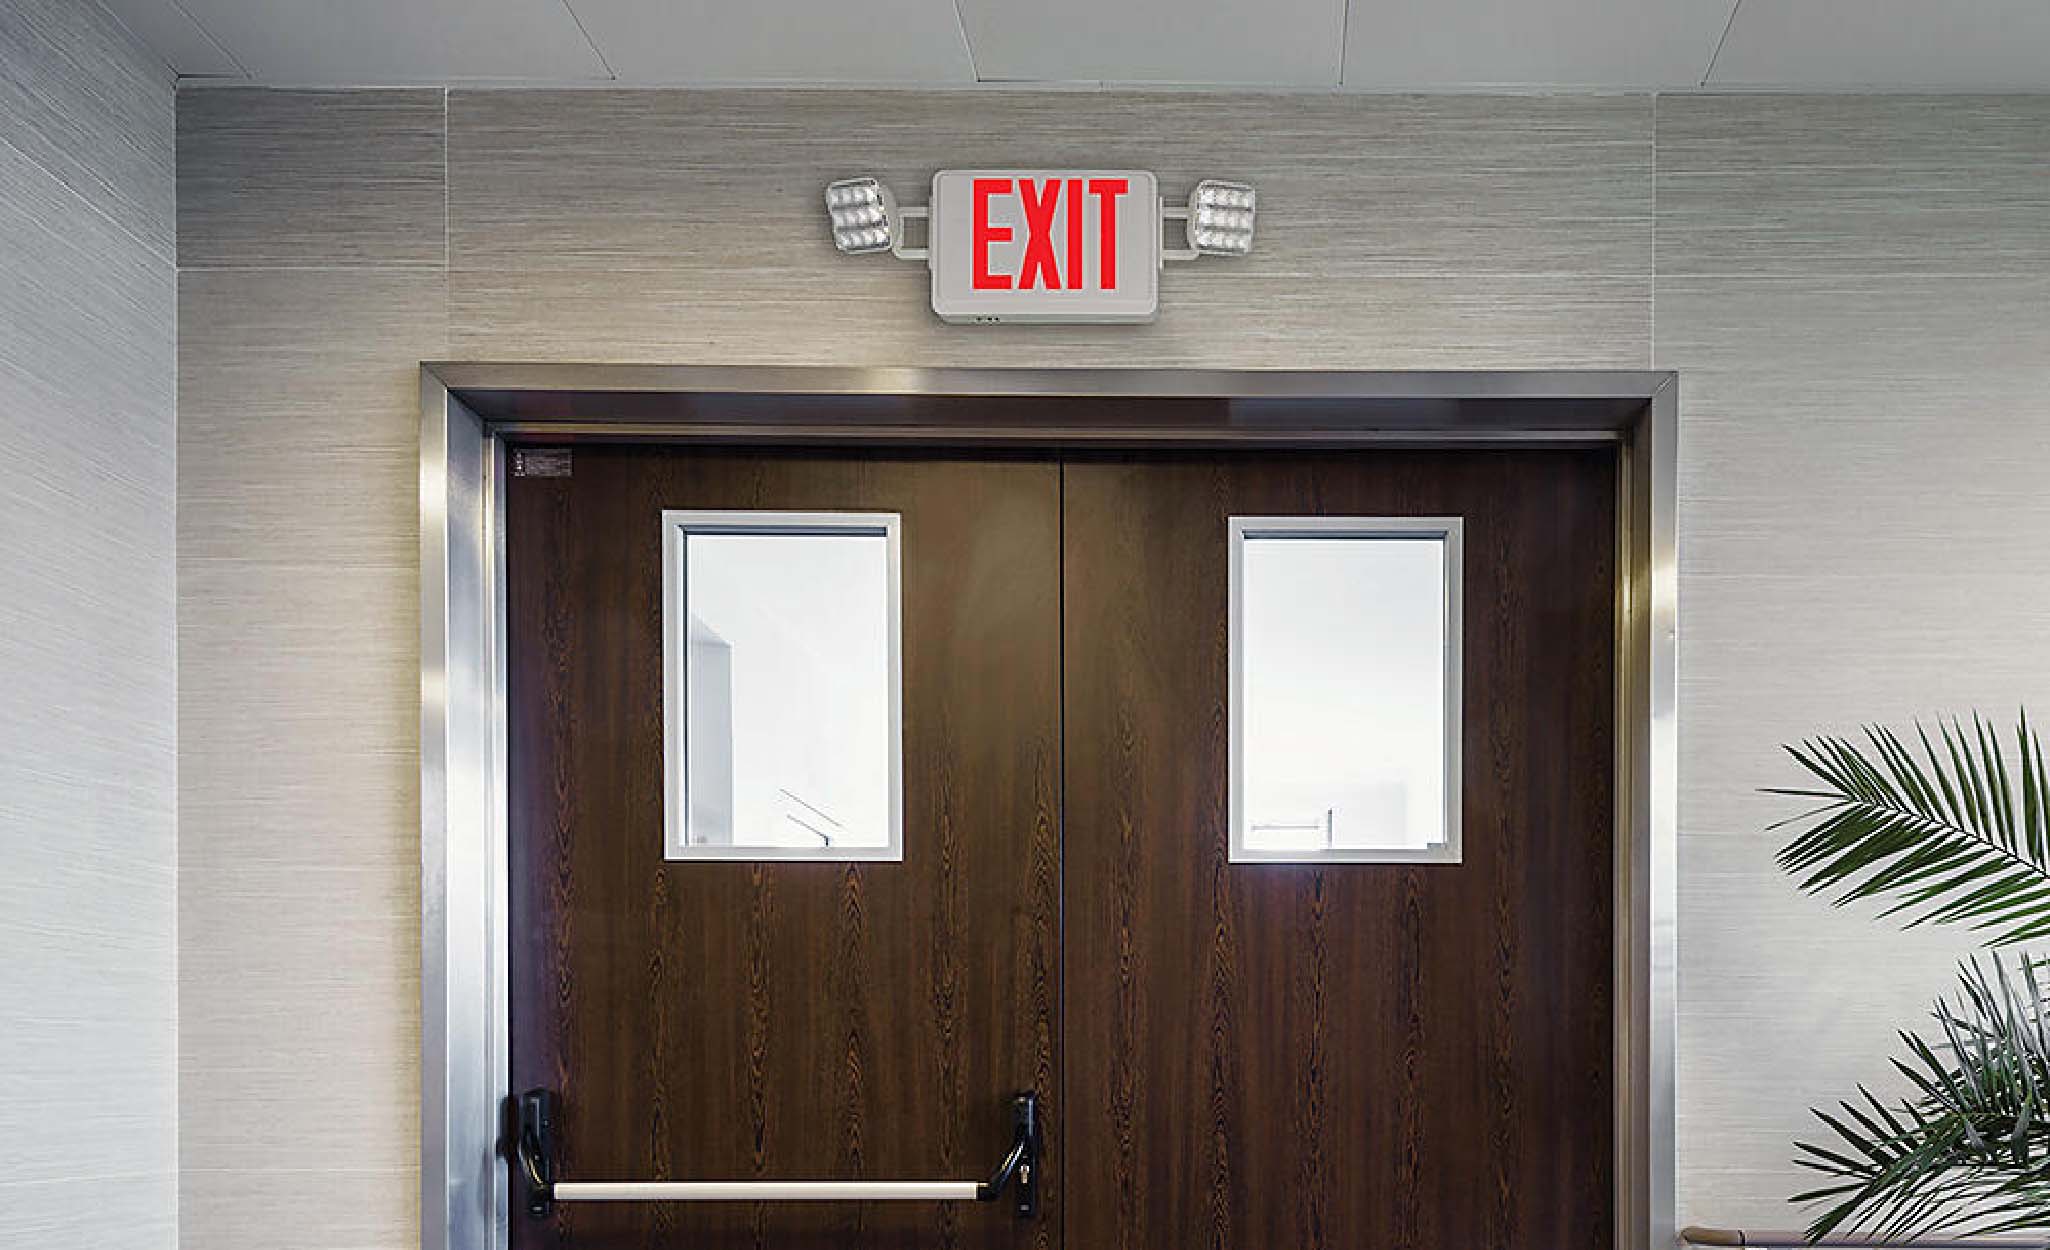 An exit sign and lights over a pair of doors.